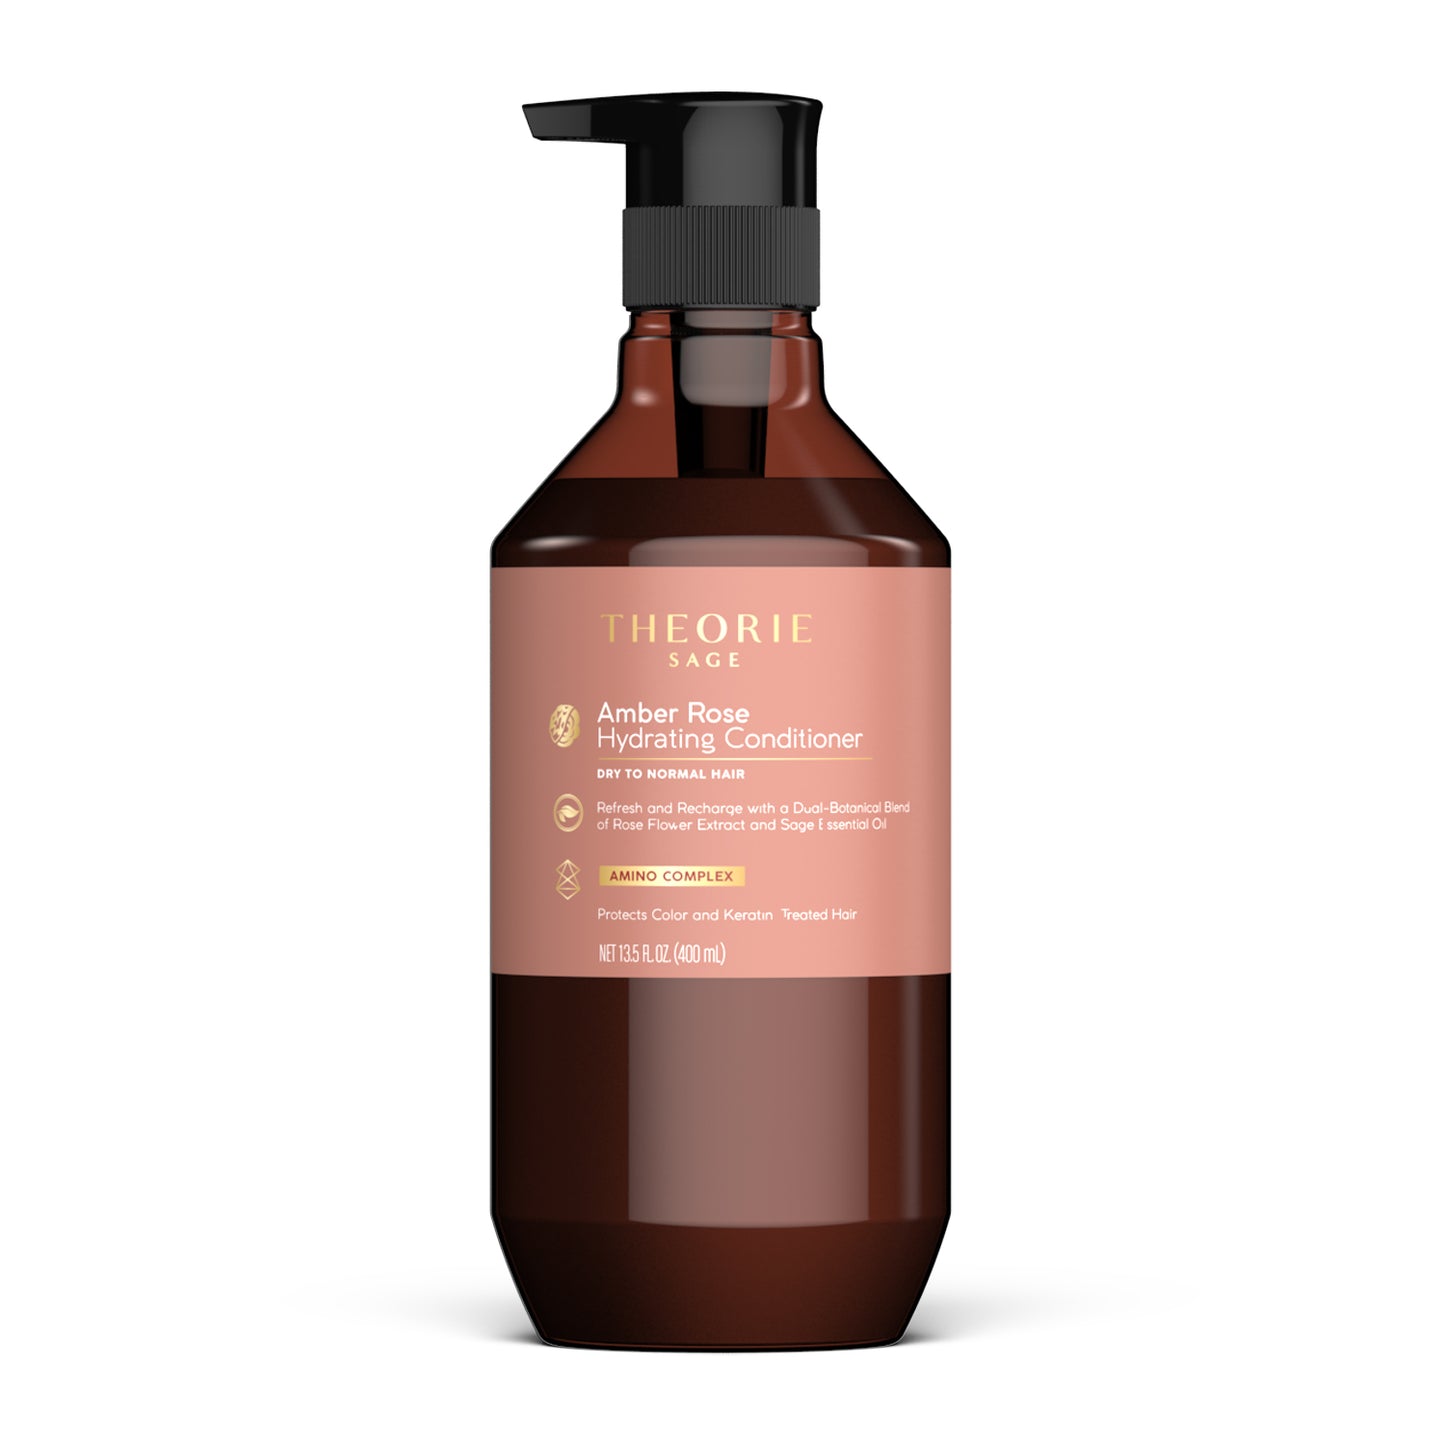 Amber Rose Hydrating Conditioner